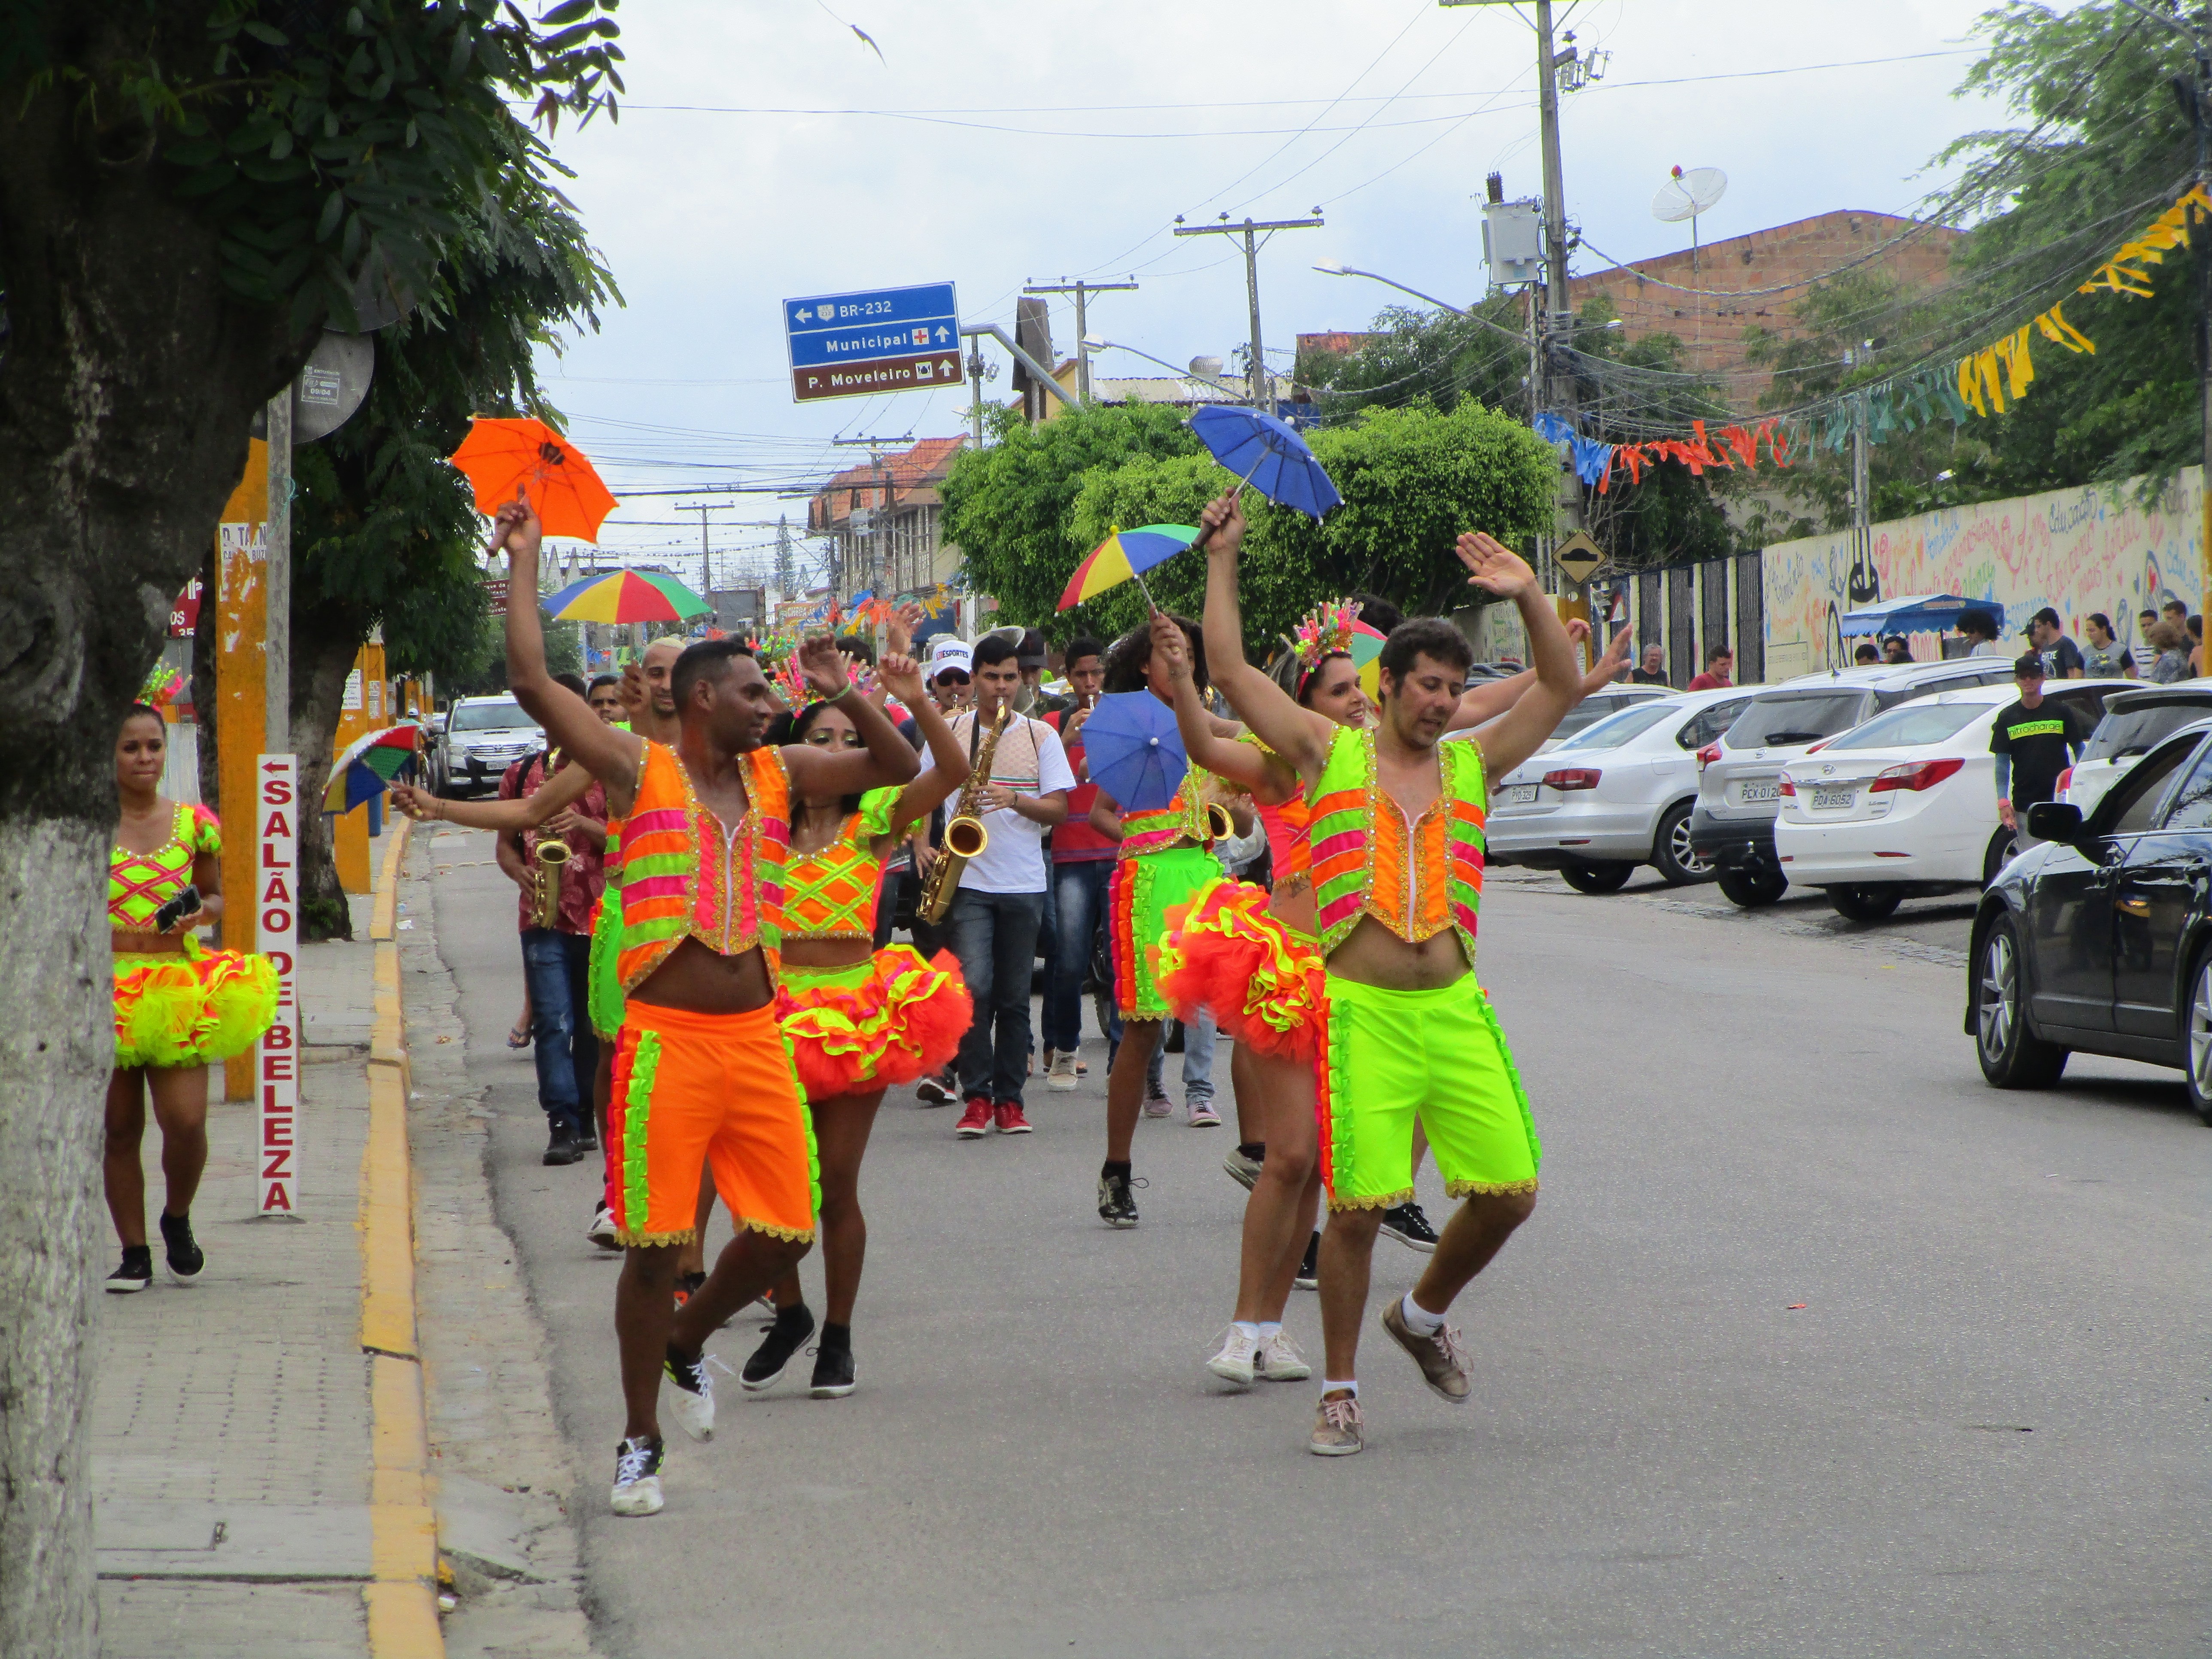 Frevo dancers holding little umbrellas and dressed in orange green and yellow neon clothing for Carnaval in Brazil